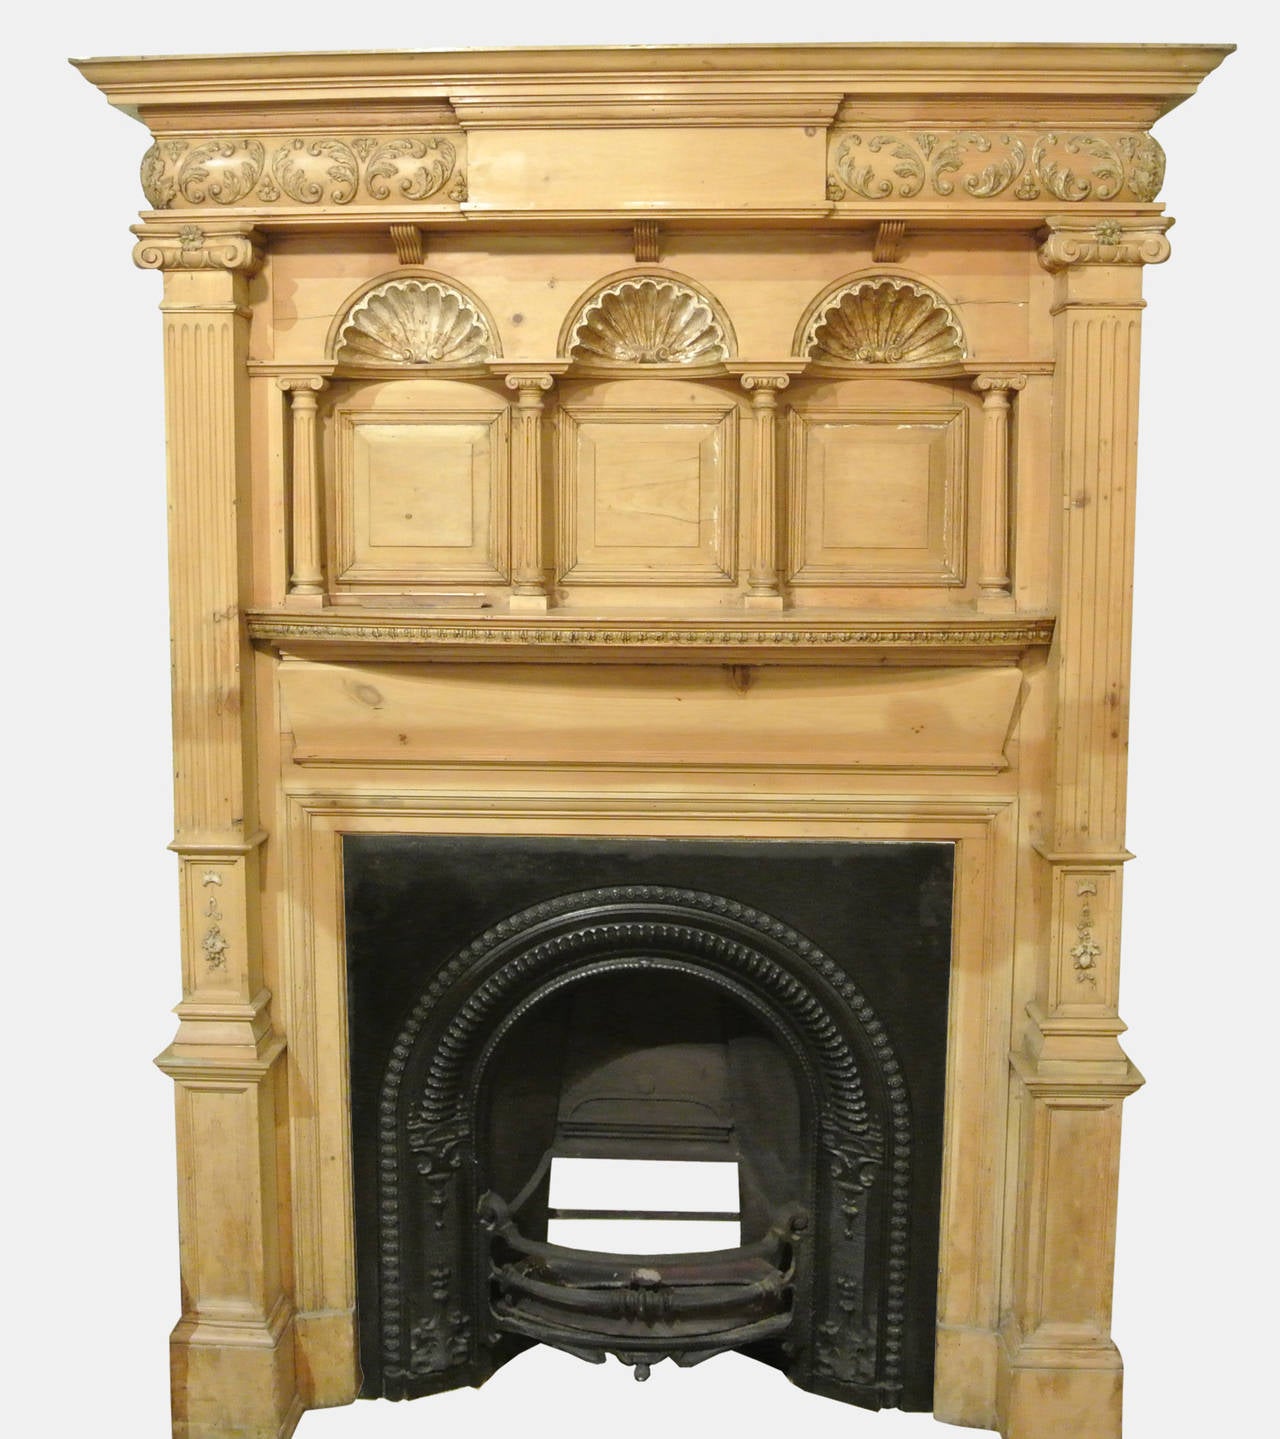 A Georgian style pine panelled fire surround of large proportions,

circa 1890.